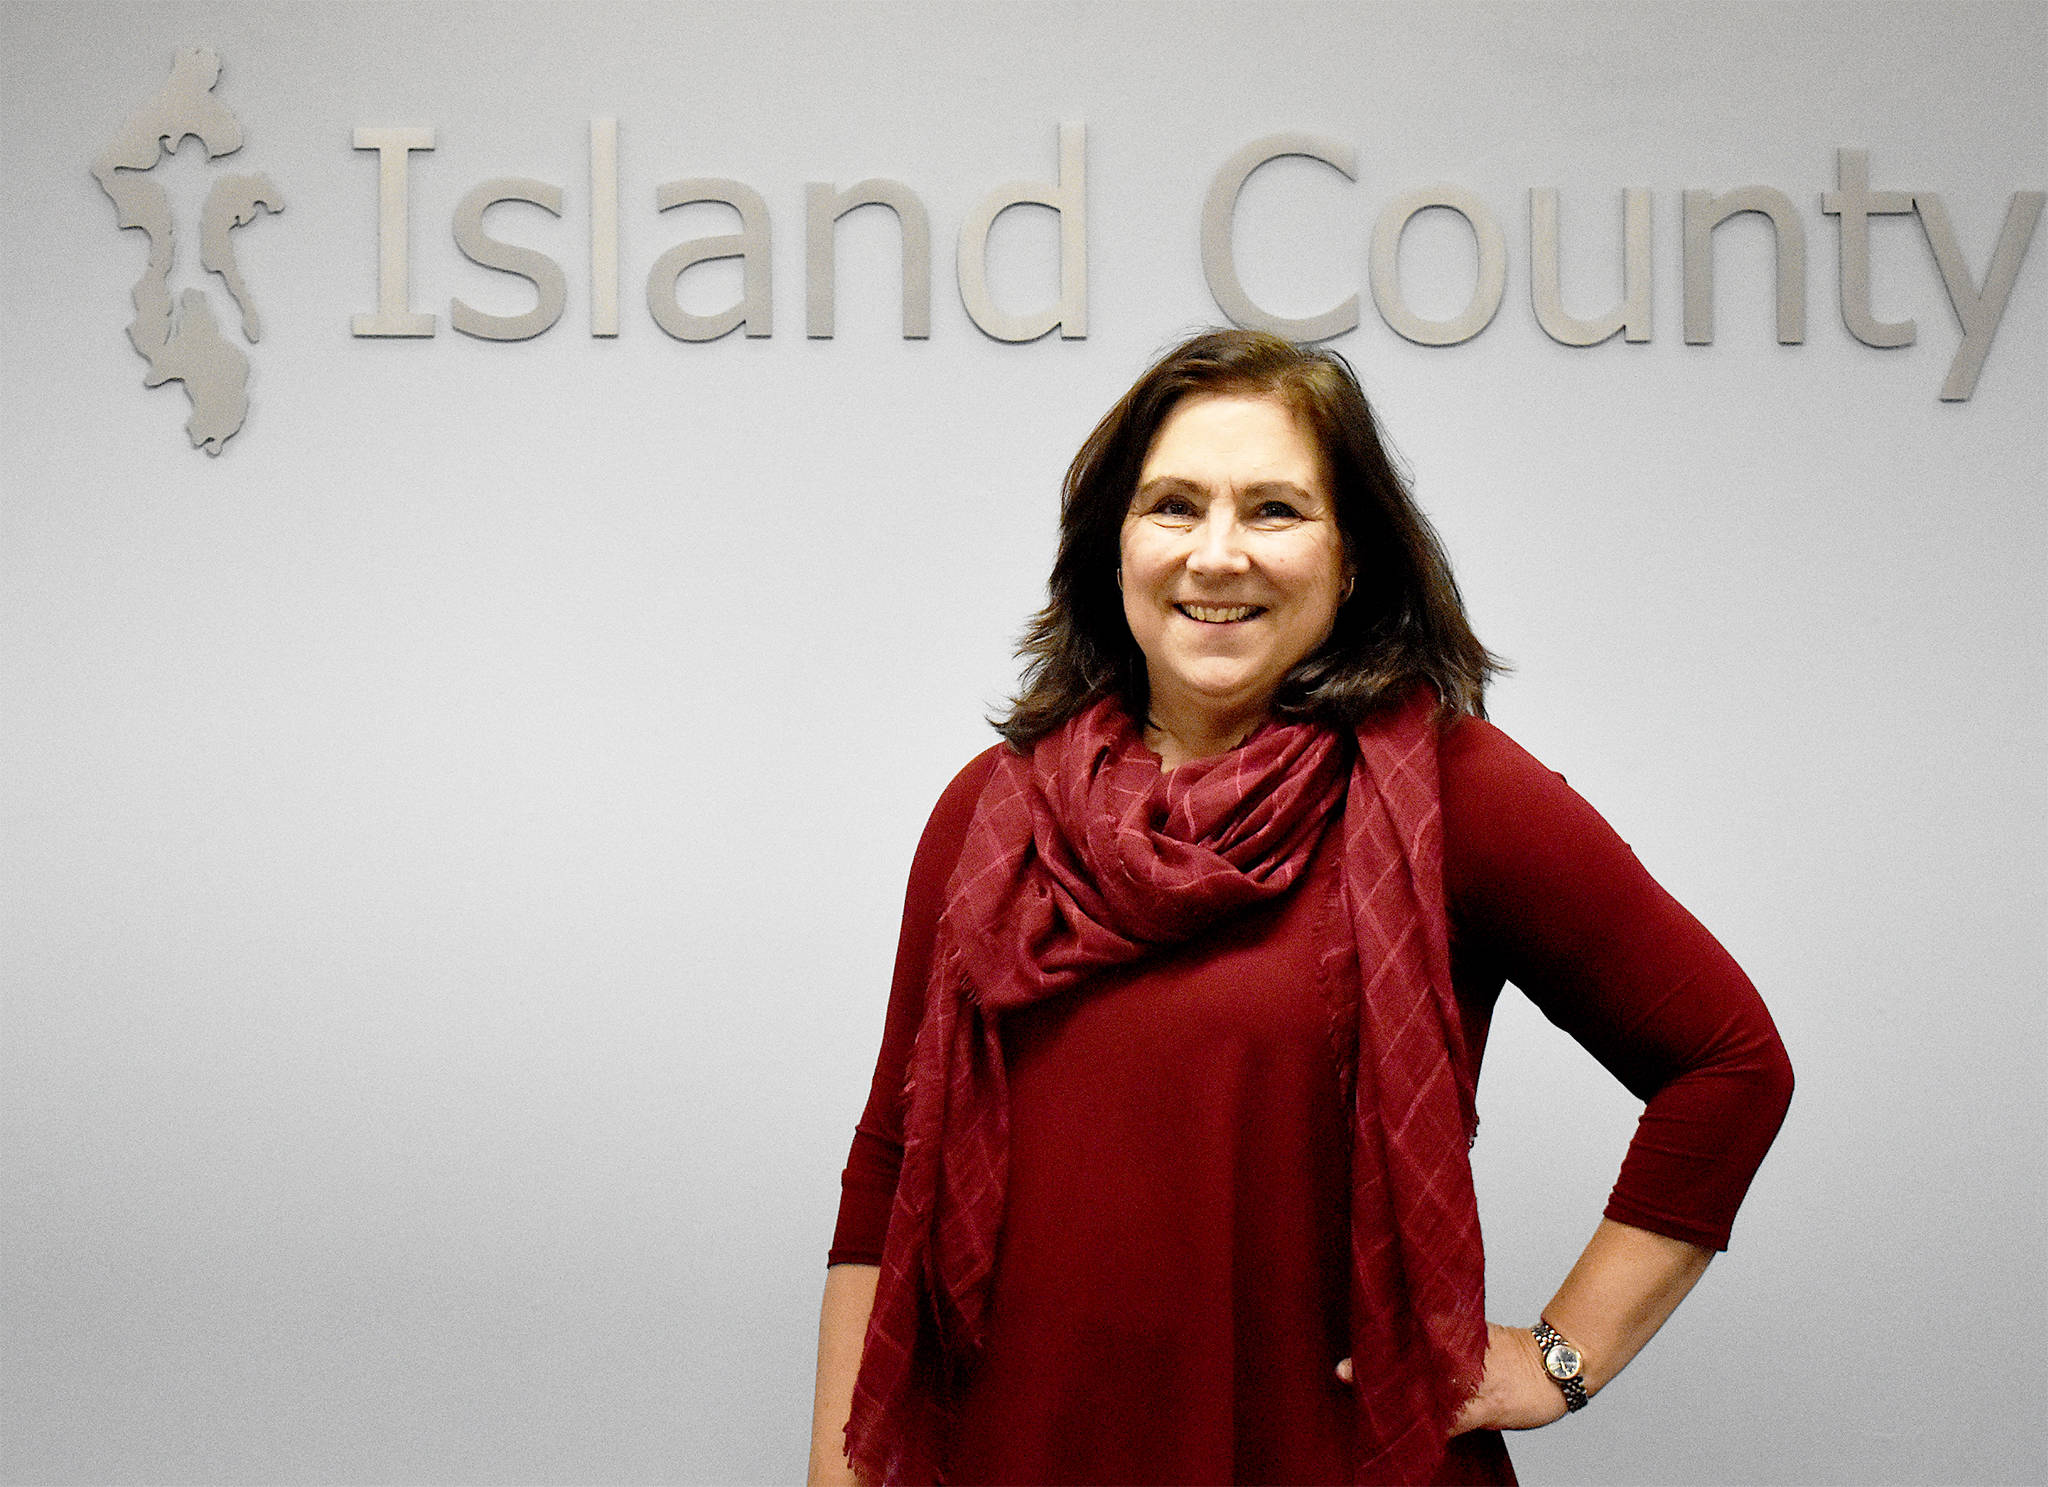 Helen Price Johnson served for 12 years as an Island County Commissioner. Photo by Emily Gilbert/Whidbey News-Times